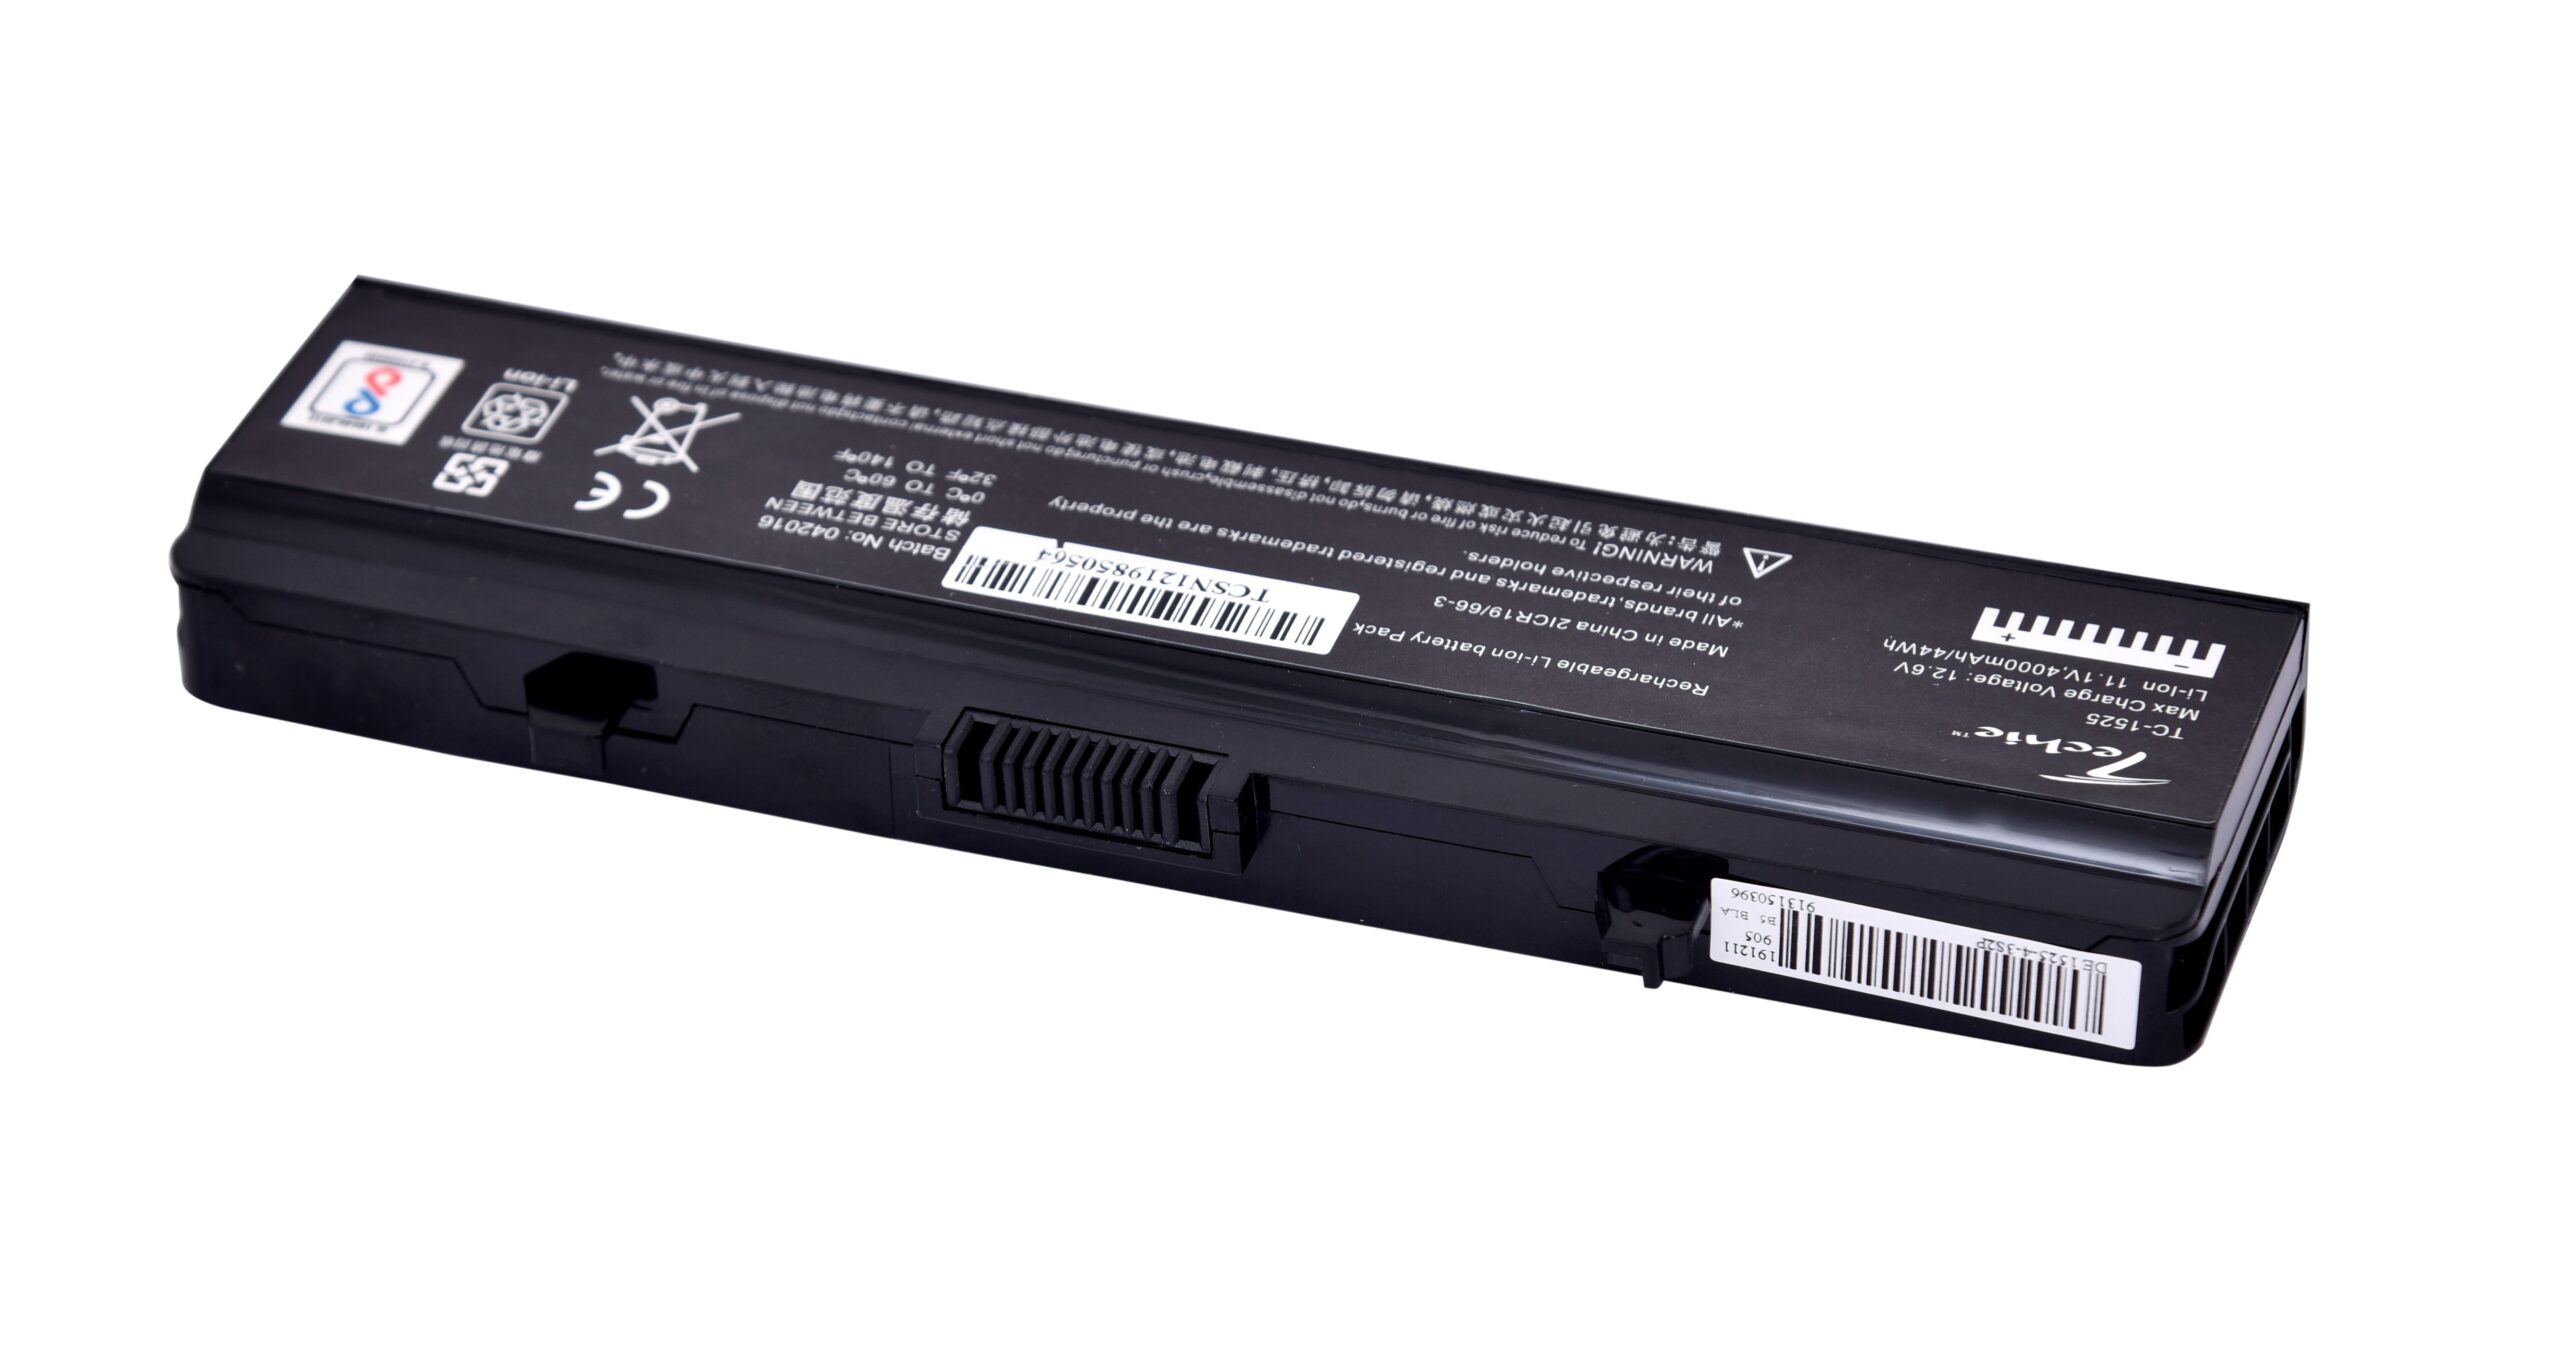 Techie Compatible Battery for Dell 1525 - Inspiron 1526, 1545, 1546, Vostro 500 Laptops (4000mAh, 6-Cell)